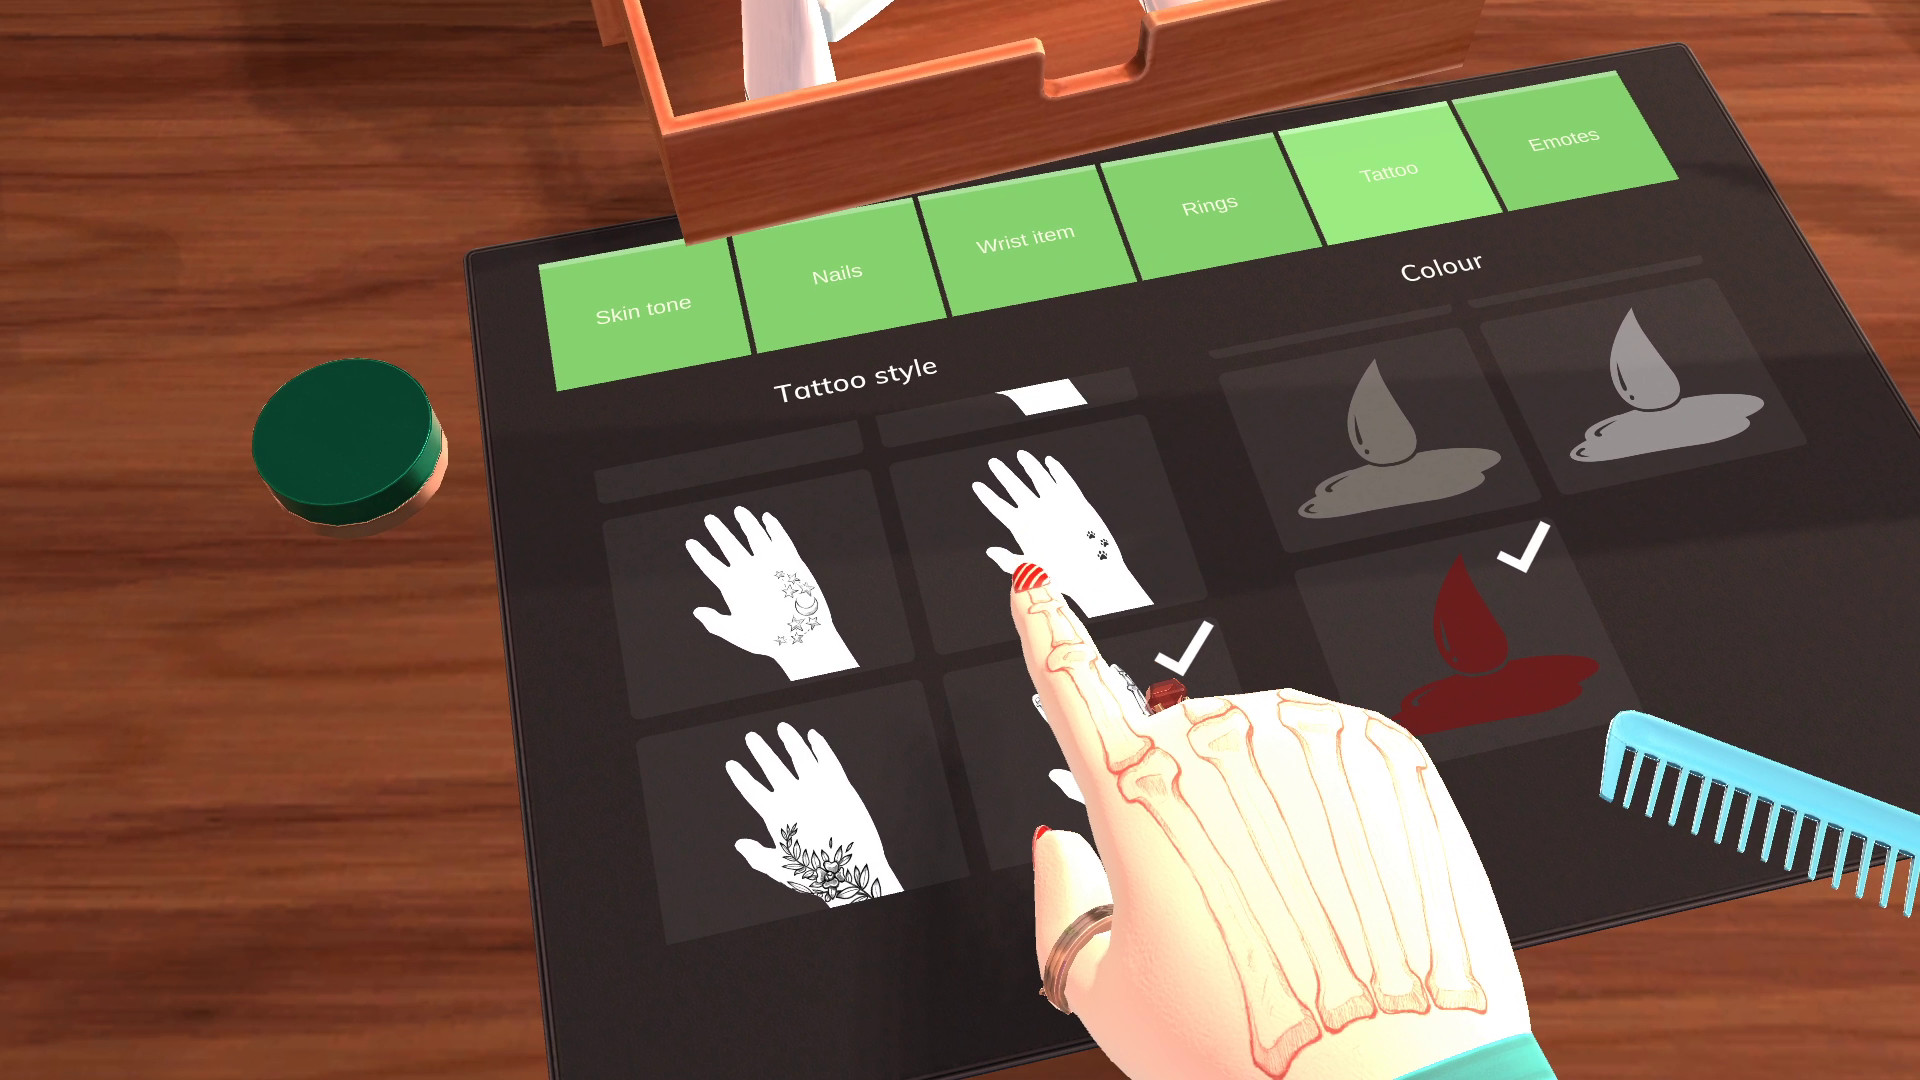 Table Manners: Physics-Based Dating Game screenshot